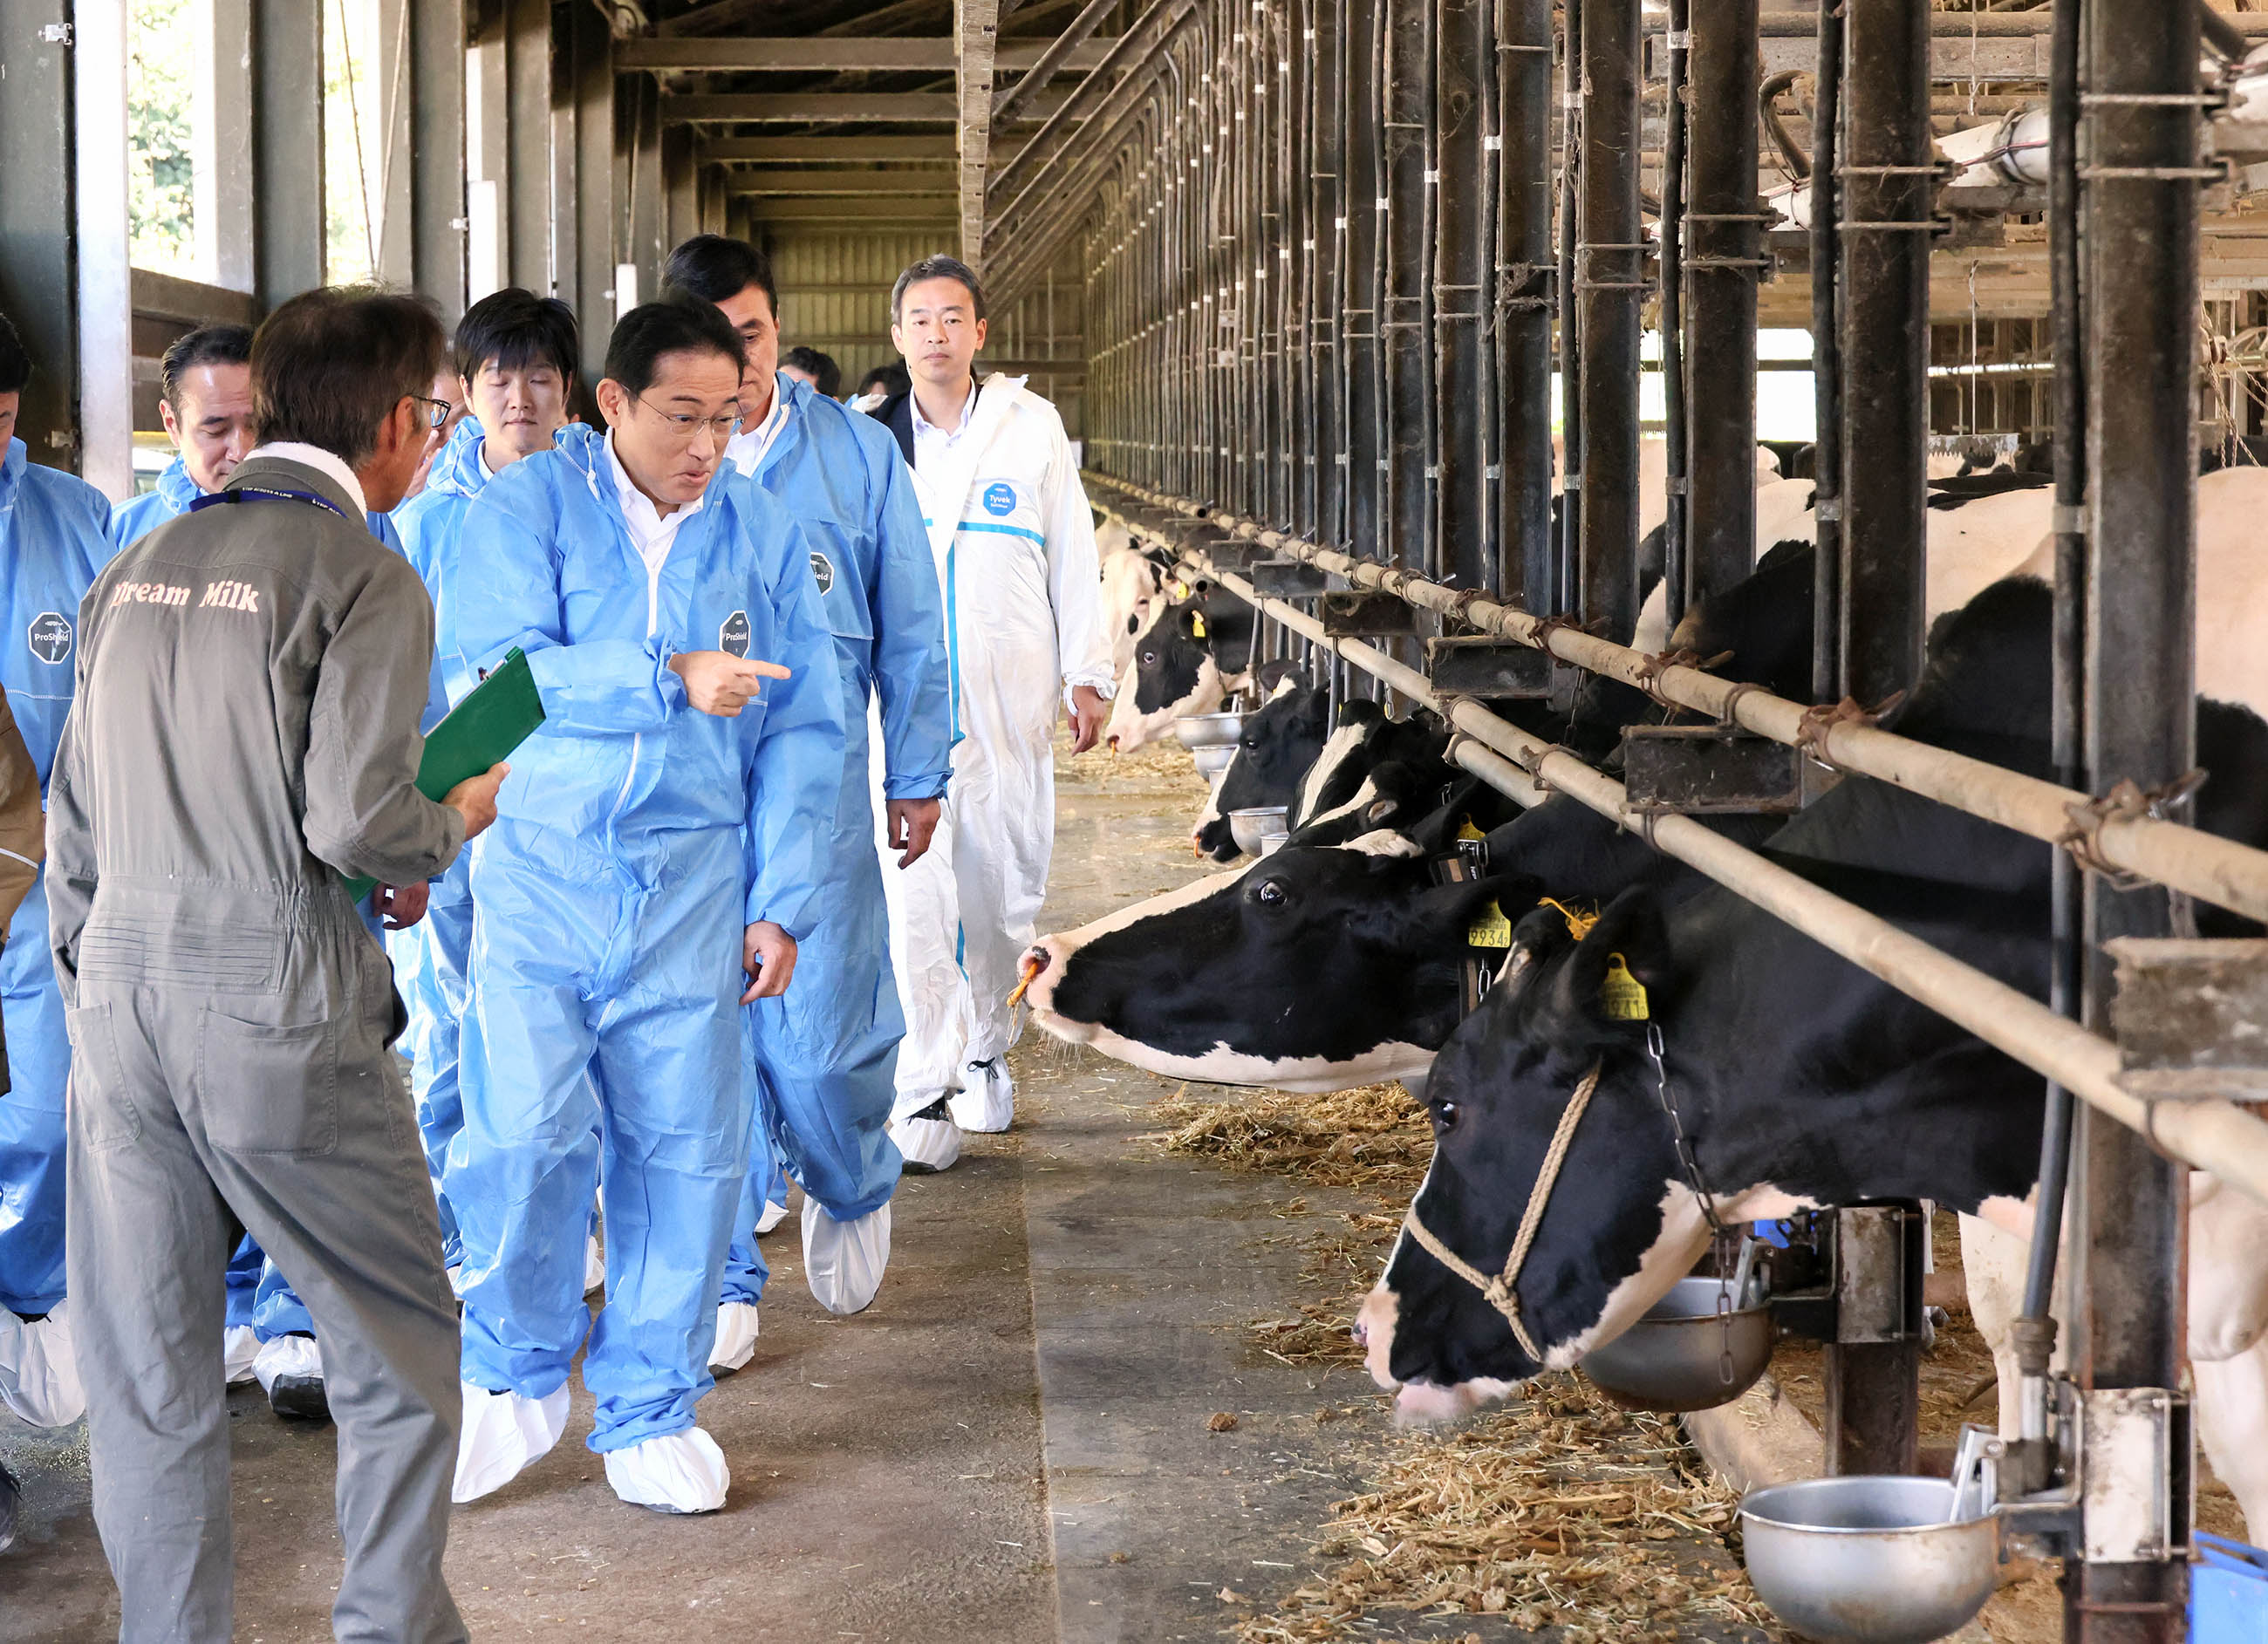 Prime Minister Kishida hearing about the milking and feeding process